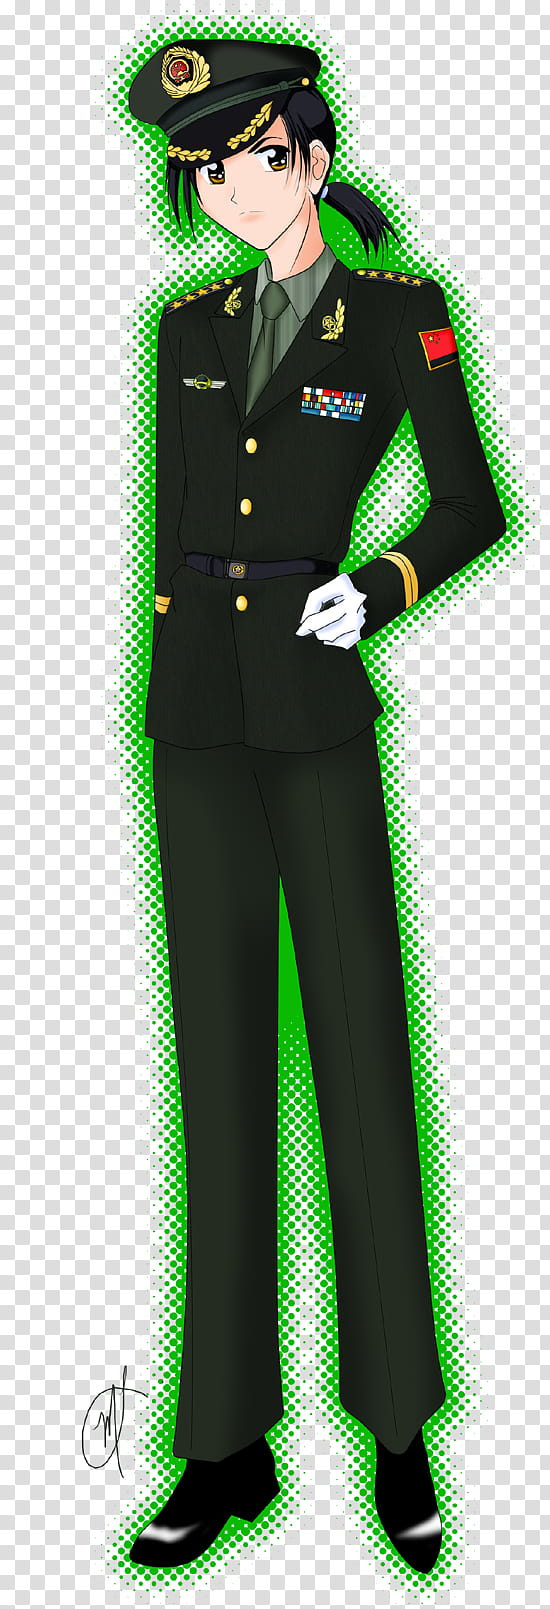 Hetalia, China PLA Uniform, black-haired male anime character illustration transparent background PNG clipart